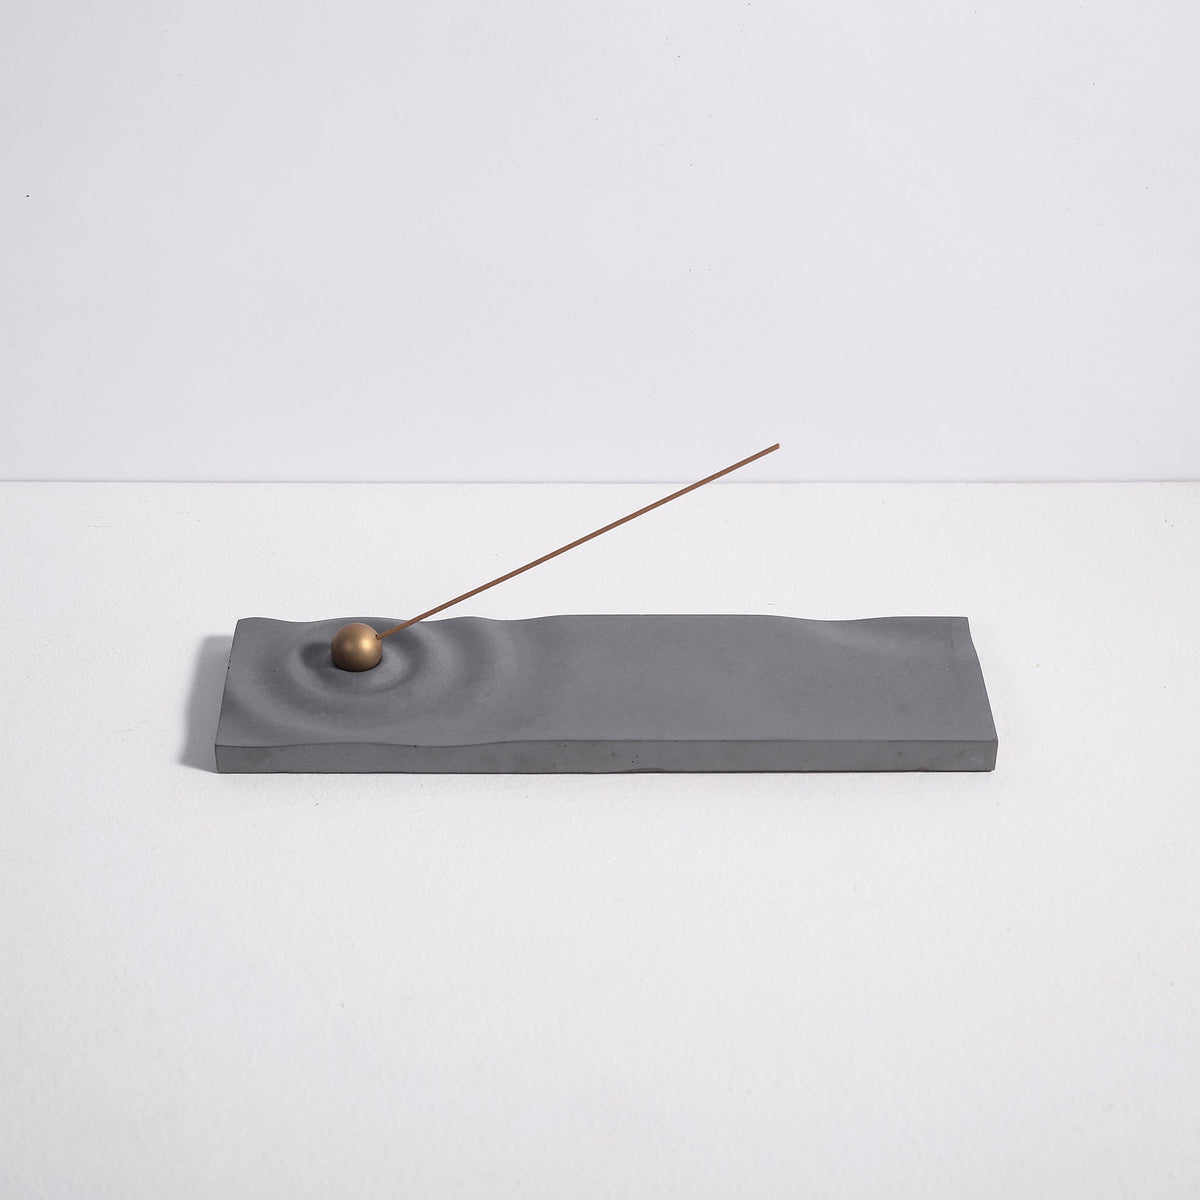 Ripple incense burner in gray by Kin Objects for incense sticks side view